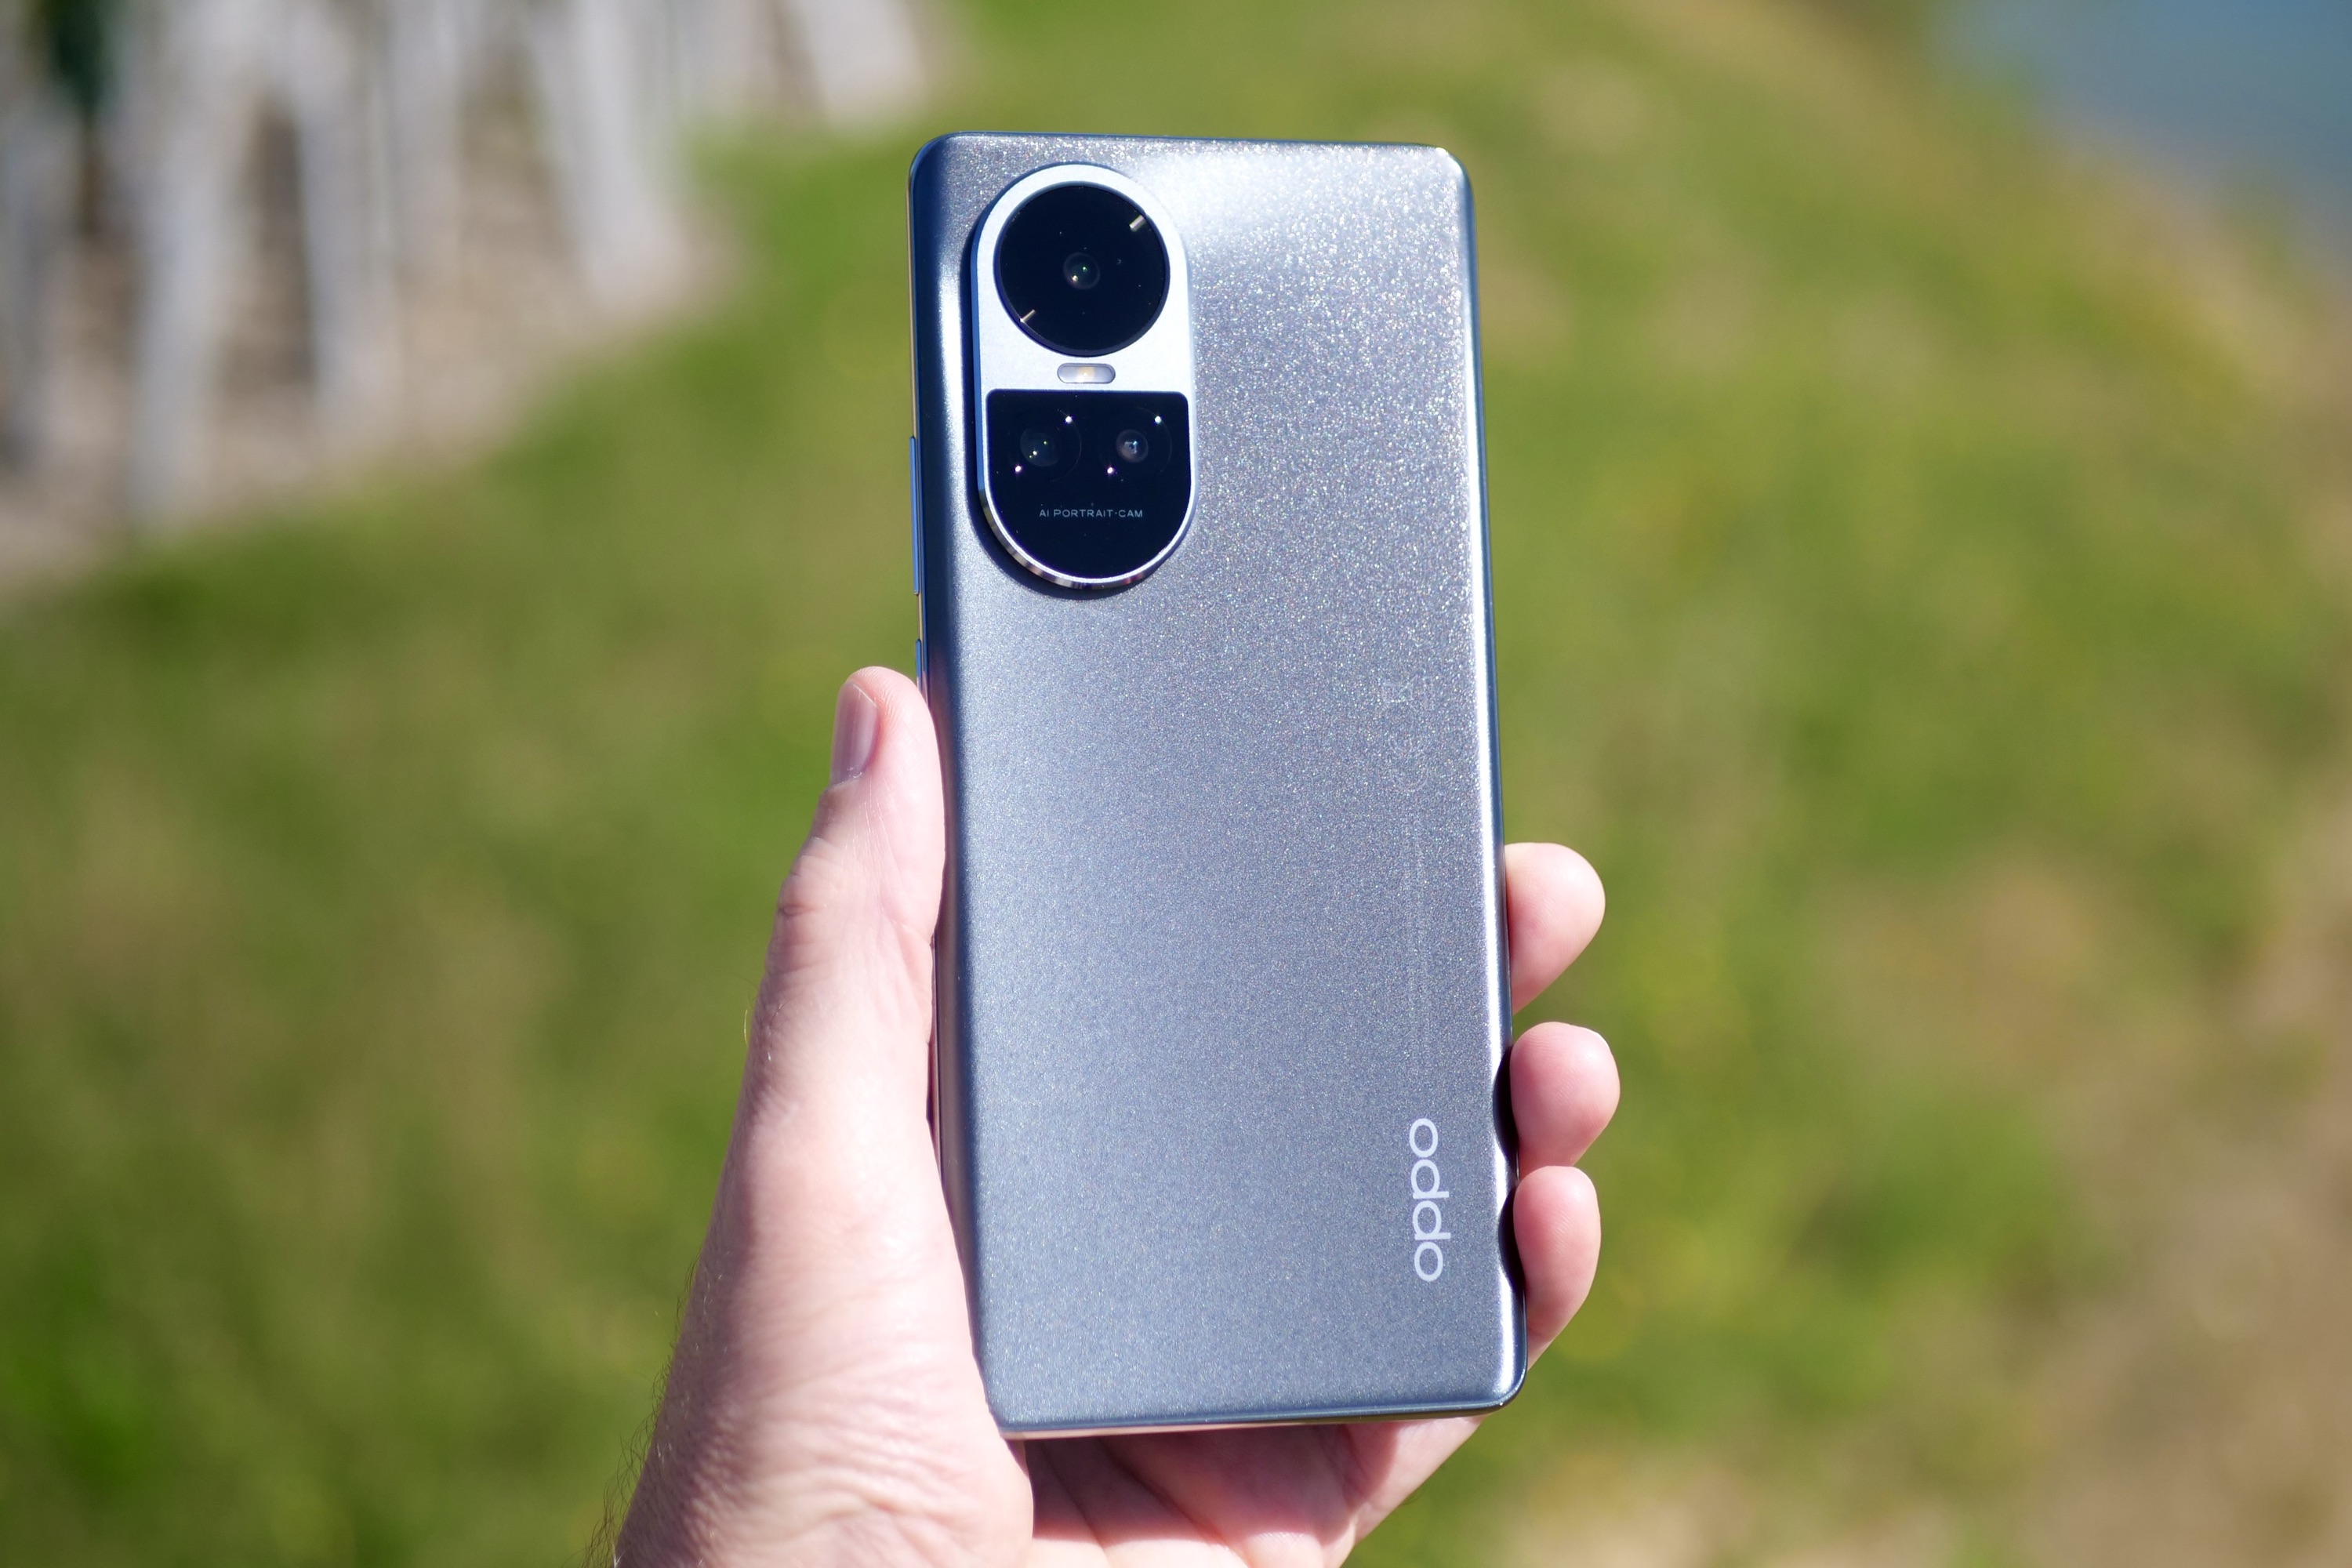 Oppo Reno 10Pro+ 5G review: Here's why this smartphone is a strong  contender among other flagship phones - BusinessToday